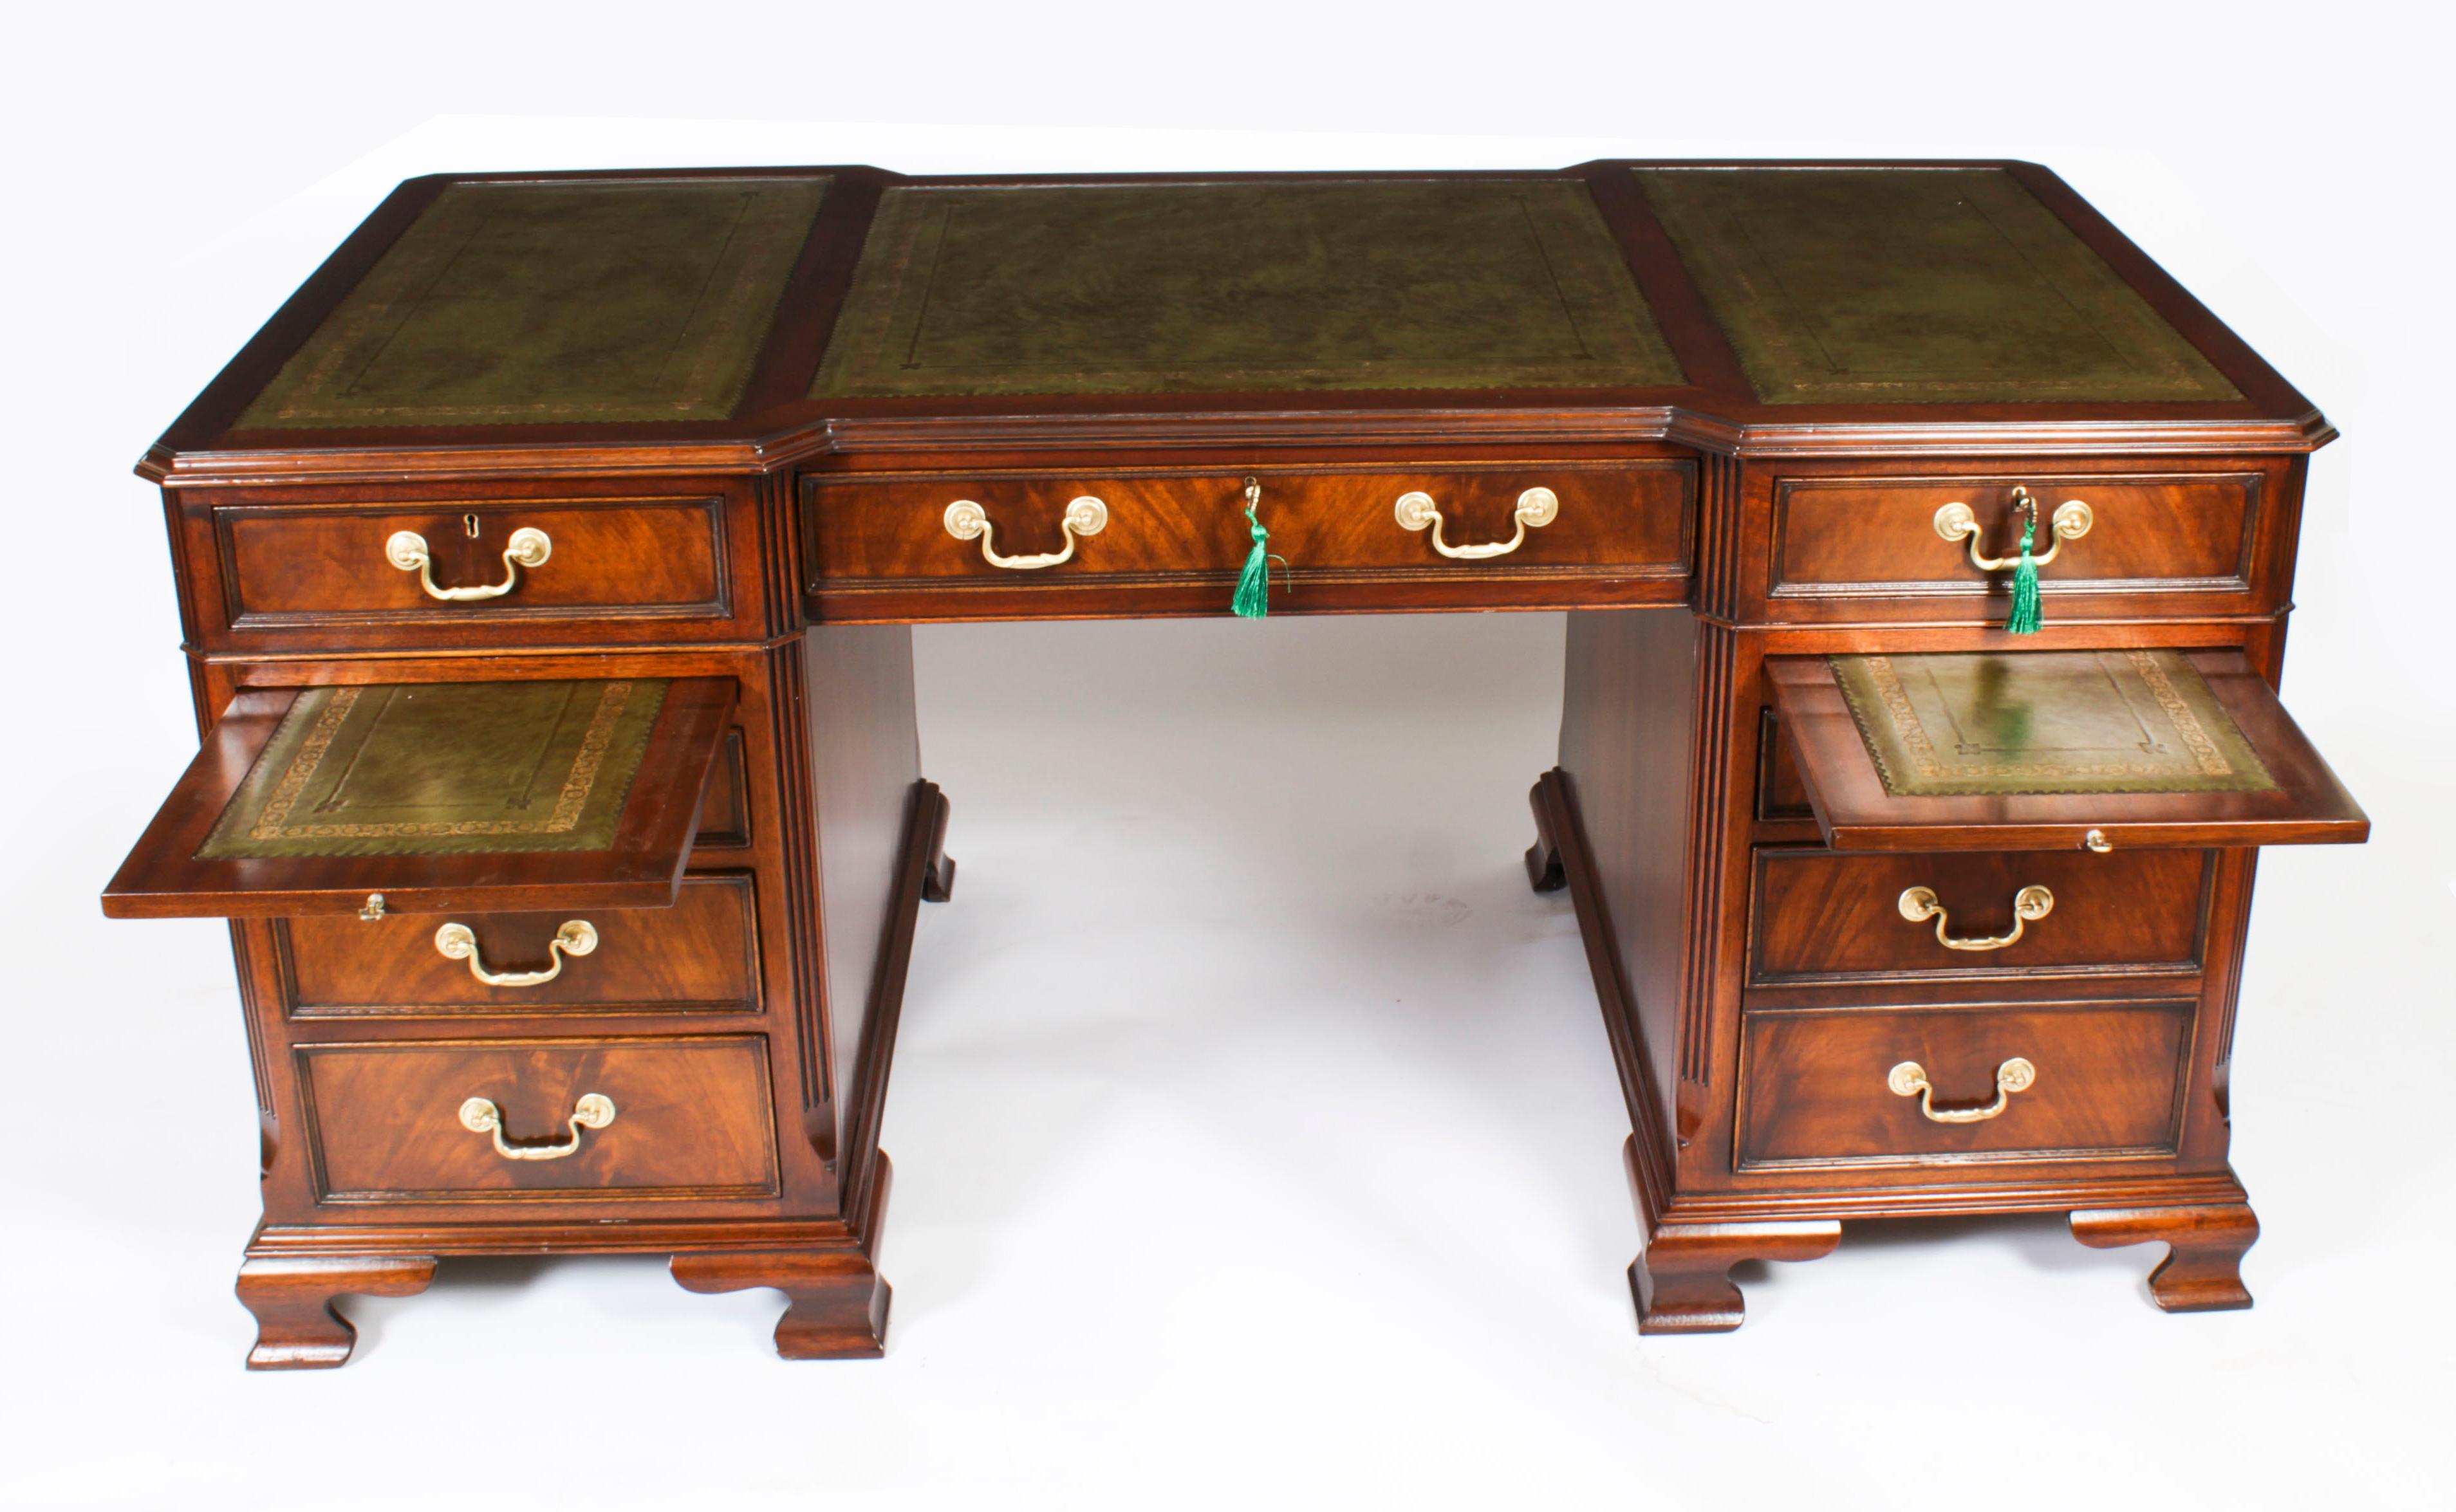 This is a stunning vintage Georgian Revival pedestal desk, masterfully crafted in flame mahogany, dating from the mid 20th century.

The desk top is of breakfront outline and is fiited with a beautiful inset three part gilt tooled green leather